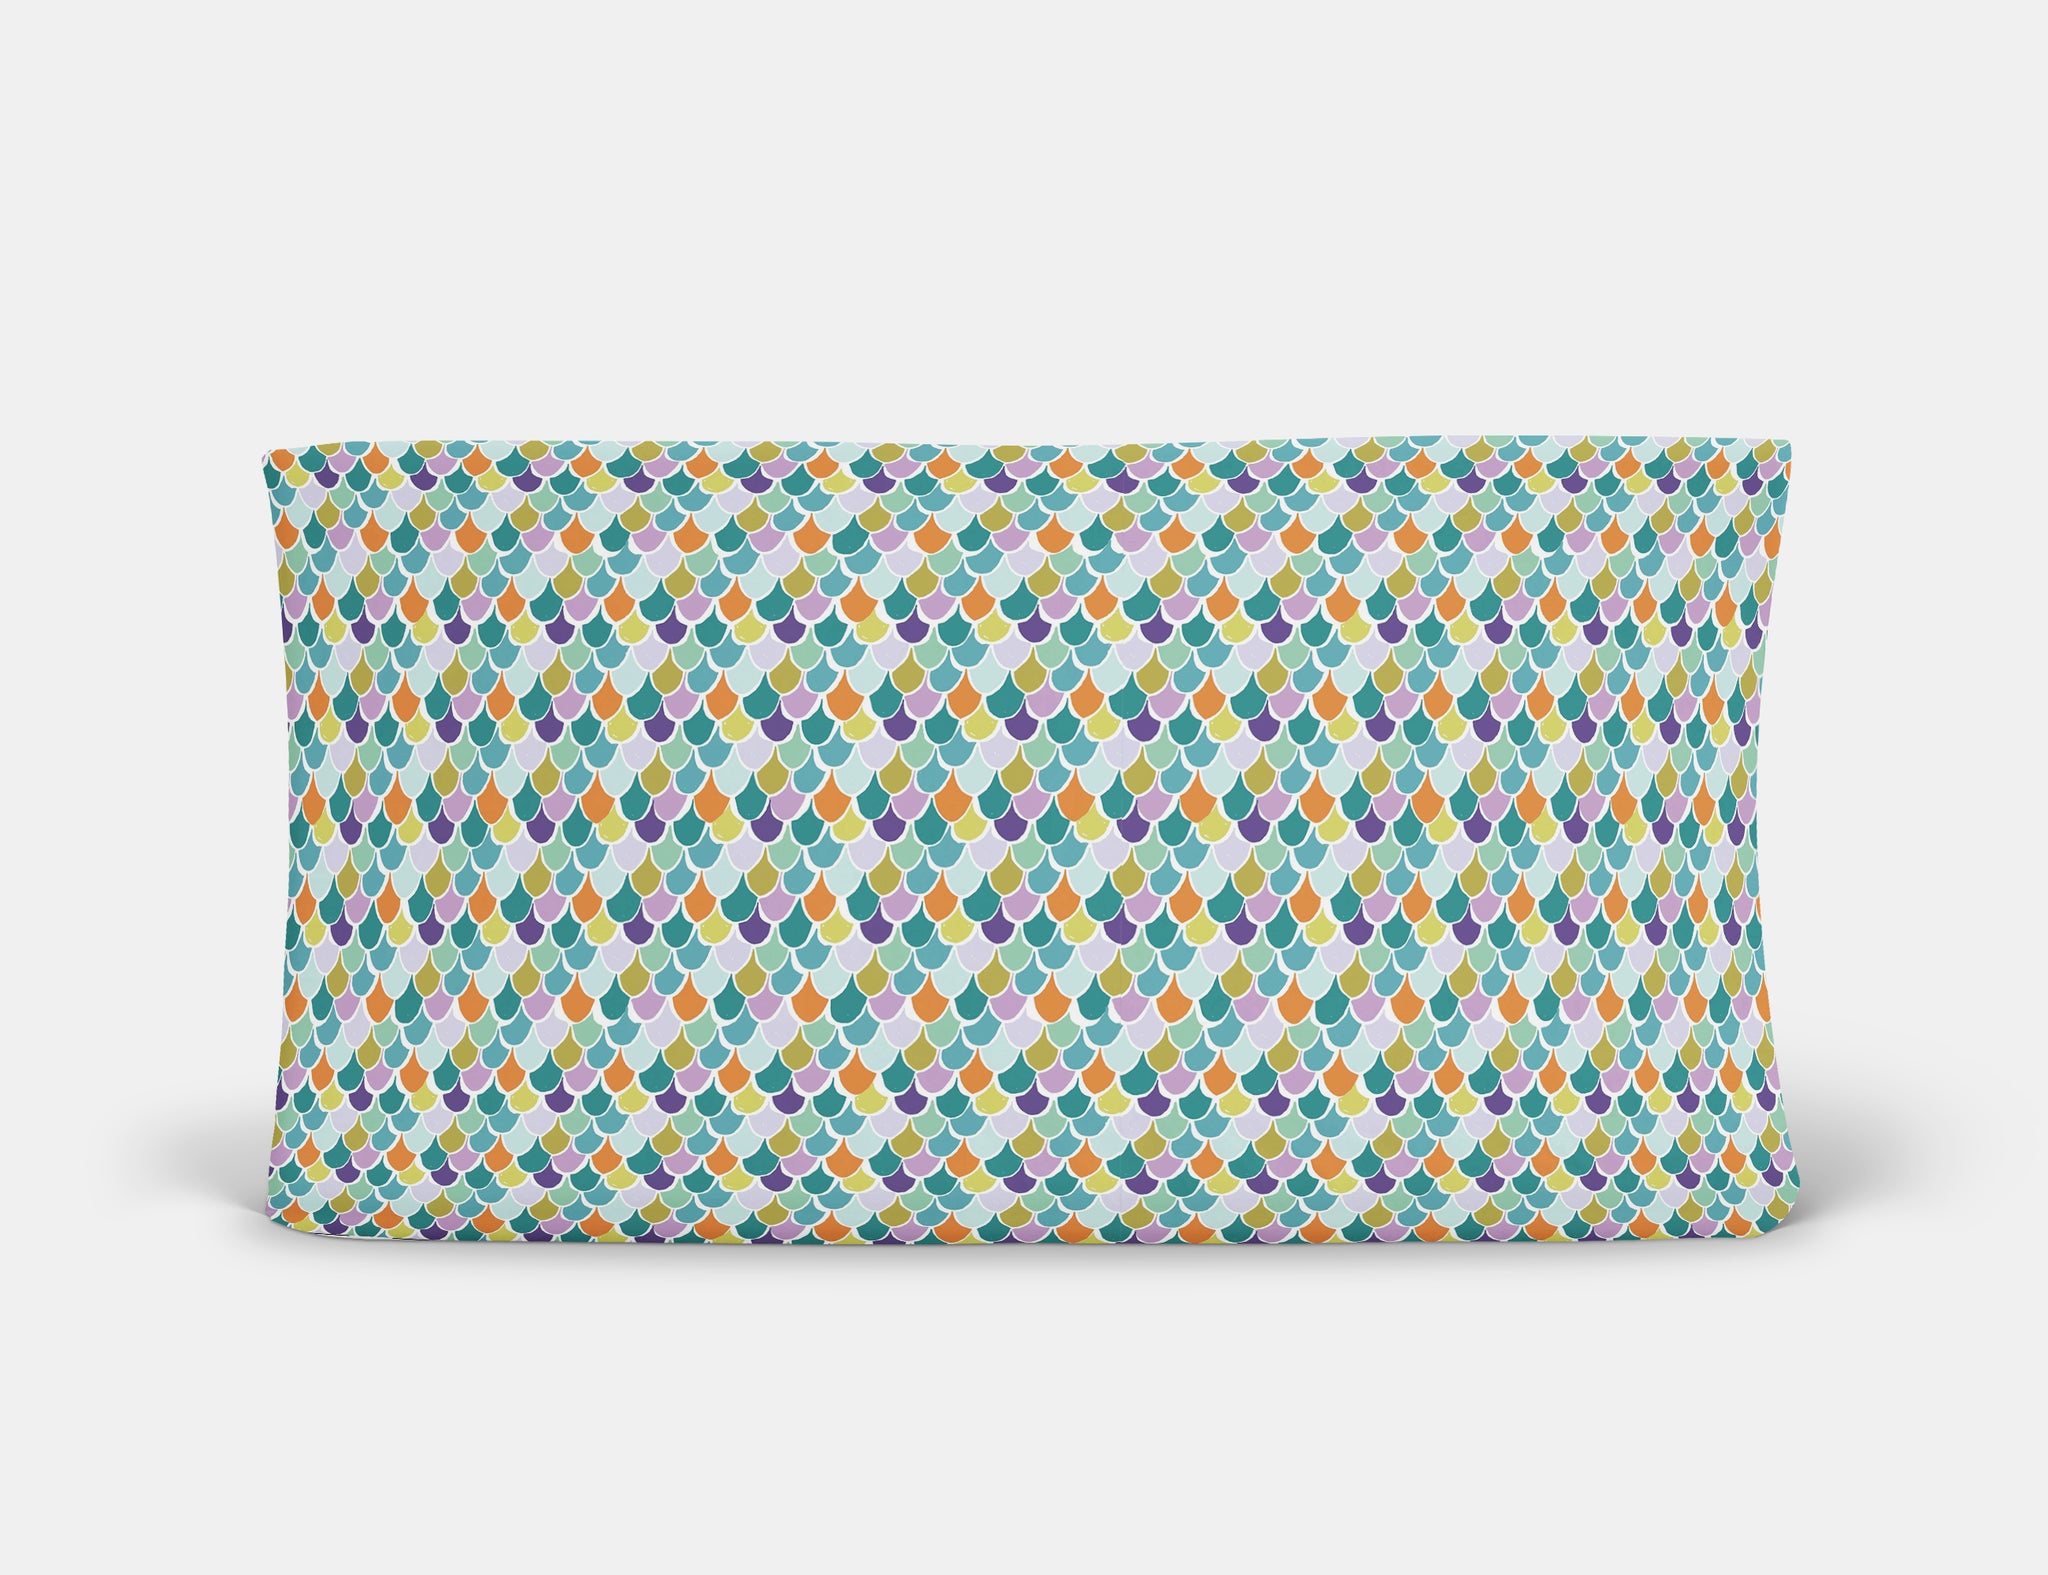 Mermaid Scales Changing Pad Cover